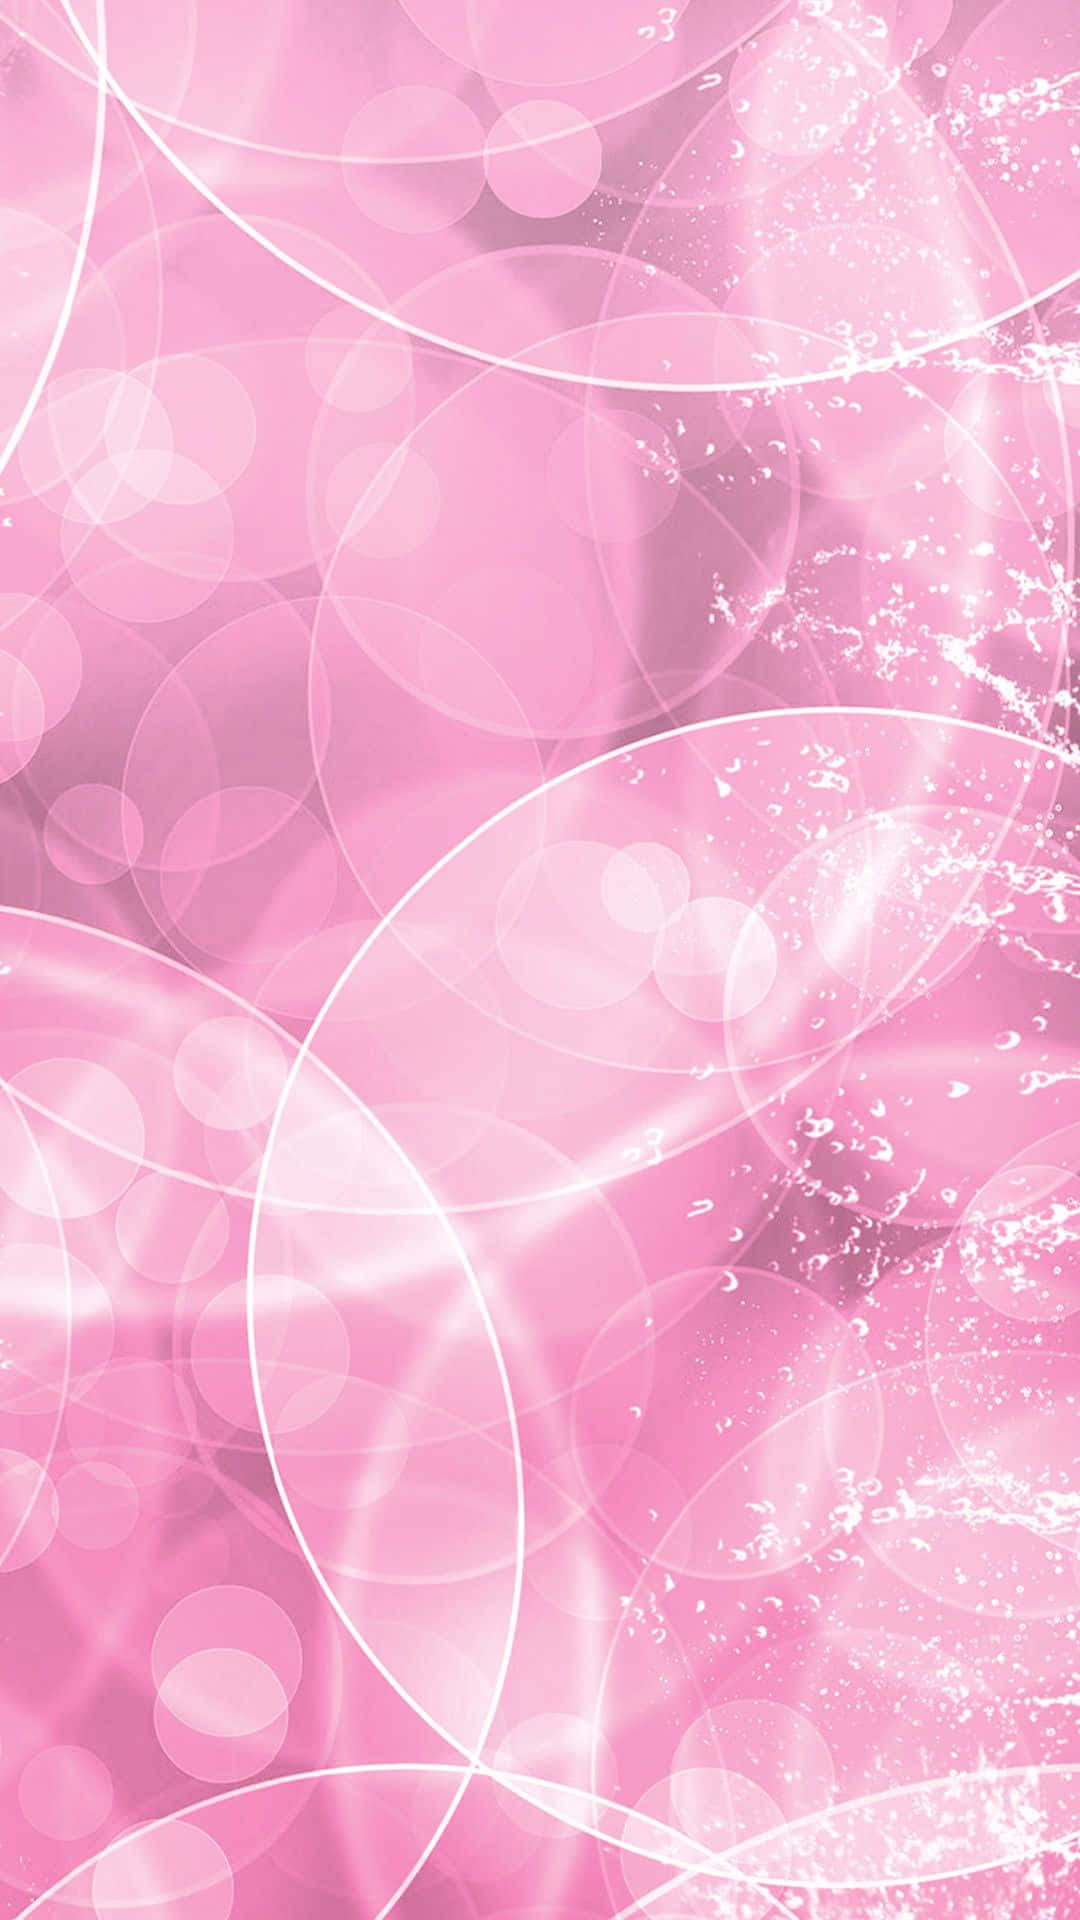 "Be your beautiful self with a touch of pink!" Wallpaper